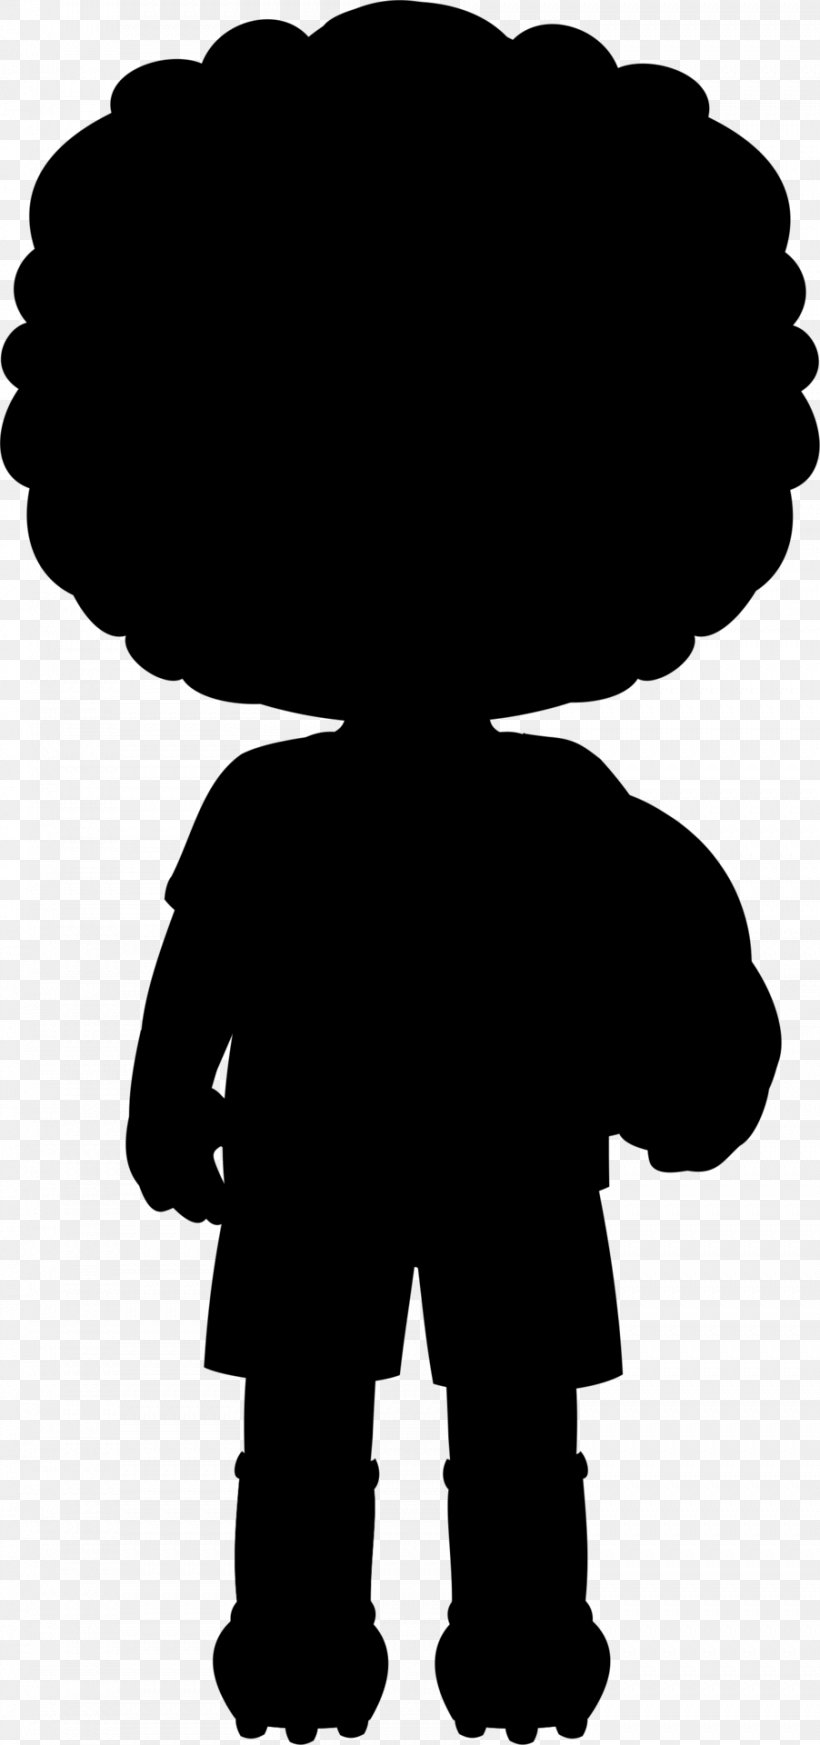 Silhouette Image Clip Art, PNG, 902x1920px, Silhouette, Black, Blackandwhite, Blossom, Chart Download Free